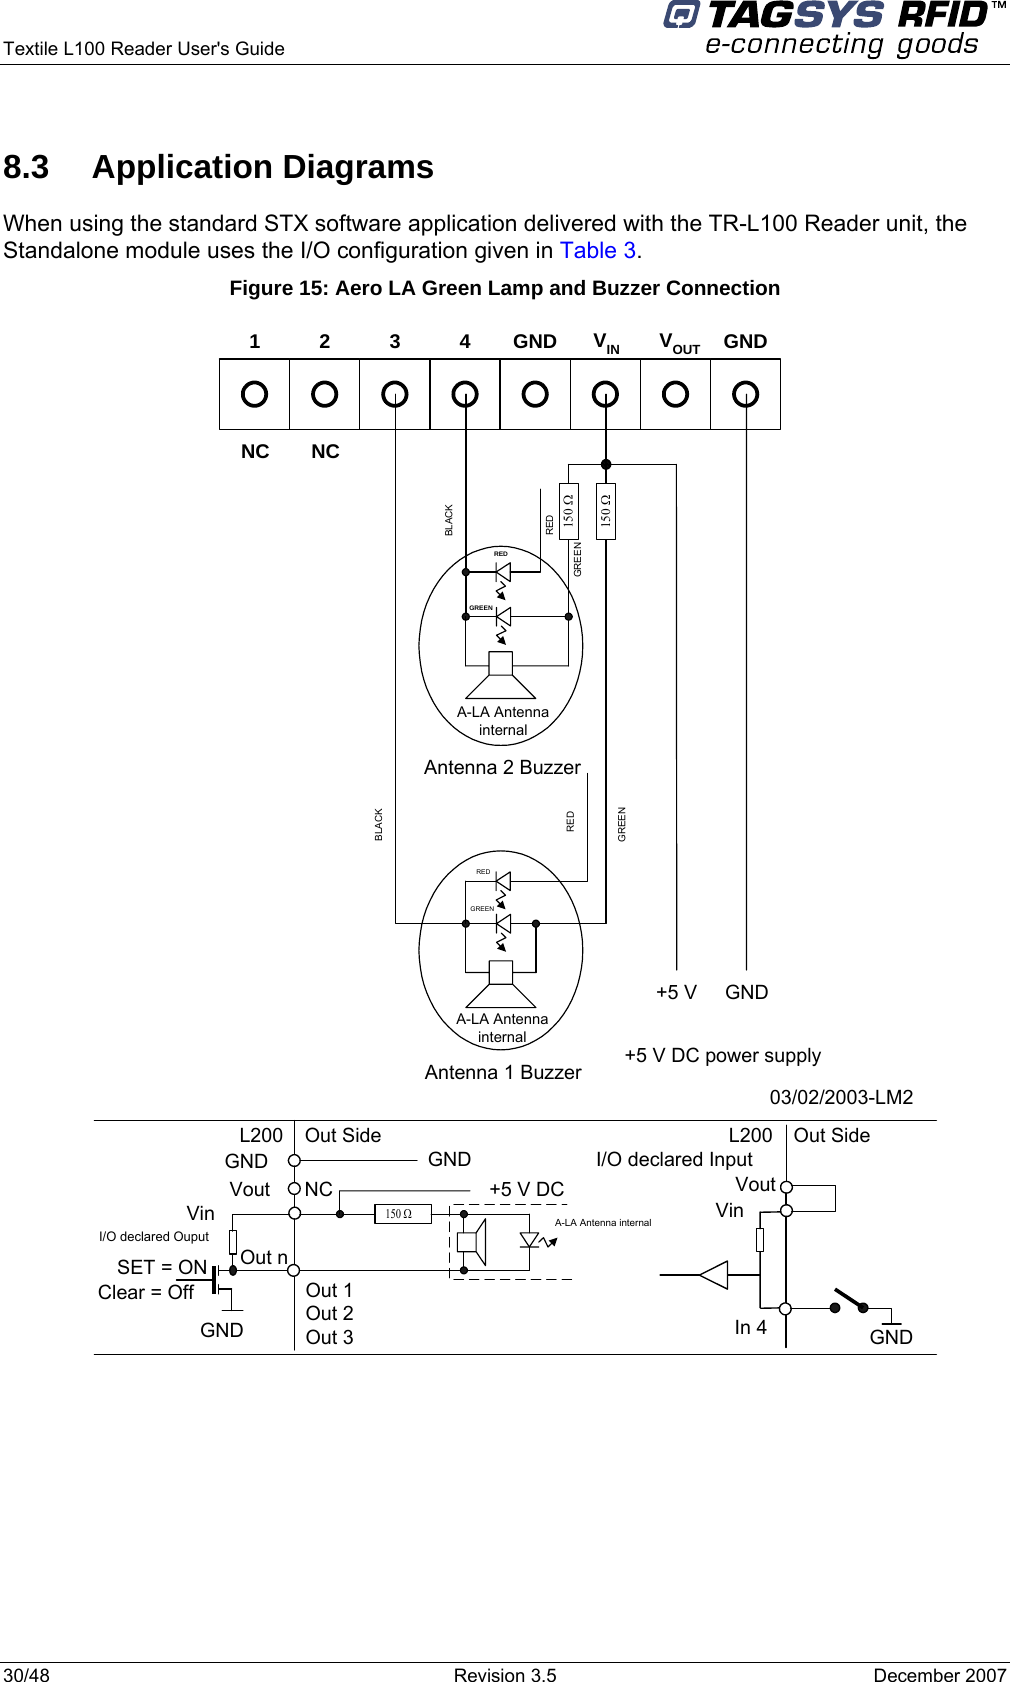  Textile L100 Reader User&apos;s Guide     30/48  Revision 3.5  December 2007 8.3 Application Diagrams When using the standard STX software application delivered with the TR-L100 Reader unit, the Standalone module uses the I/O configuration given in Table 3. Figure 15: Aero LA Green Lamp and Buzzer Connection 03/02/2003-LM21234GNDVINGNDI/O declared OuputSET = ONClear = OffVoutVinGNDI/O declared InputVoutVinGNDIn 4Out nL200 Out Side L200 Out SideOut 1Out 2Out 3NCNCAntenna 1 BuzzerAntenna 2 BuzzerGND GNDNC +5 V DC+5 V DC power supply+5 V GNDGREENGREENBLACKBLACK150 Ω150 Ω150 ΩA-LA Antenna internalA-LA AntennainternalA-LA AntennainternalREDGREENREDREDGREENREDVOUT 